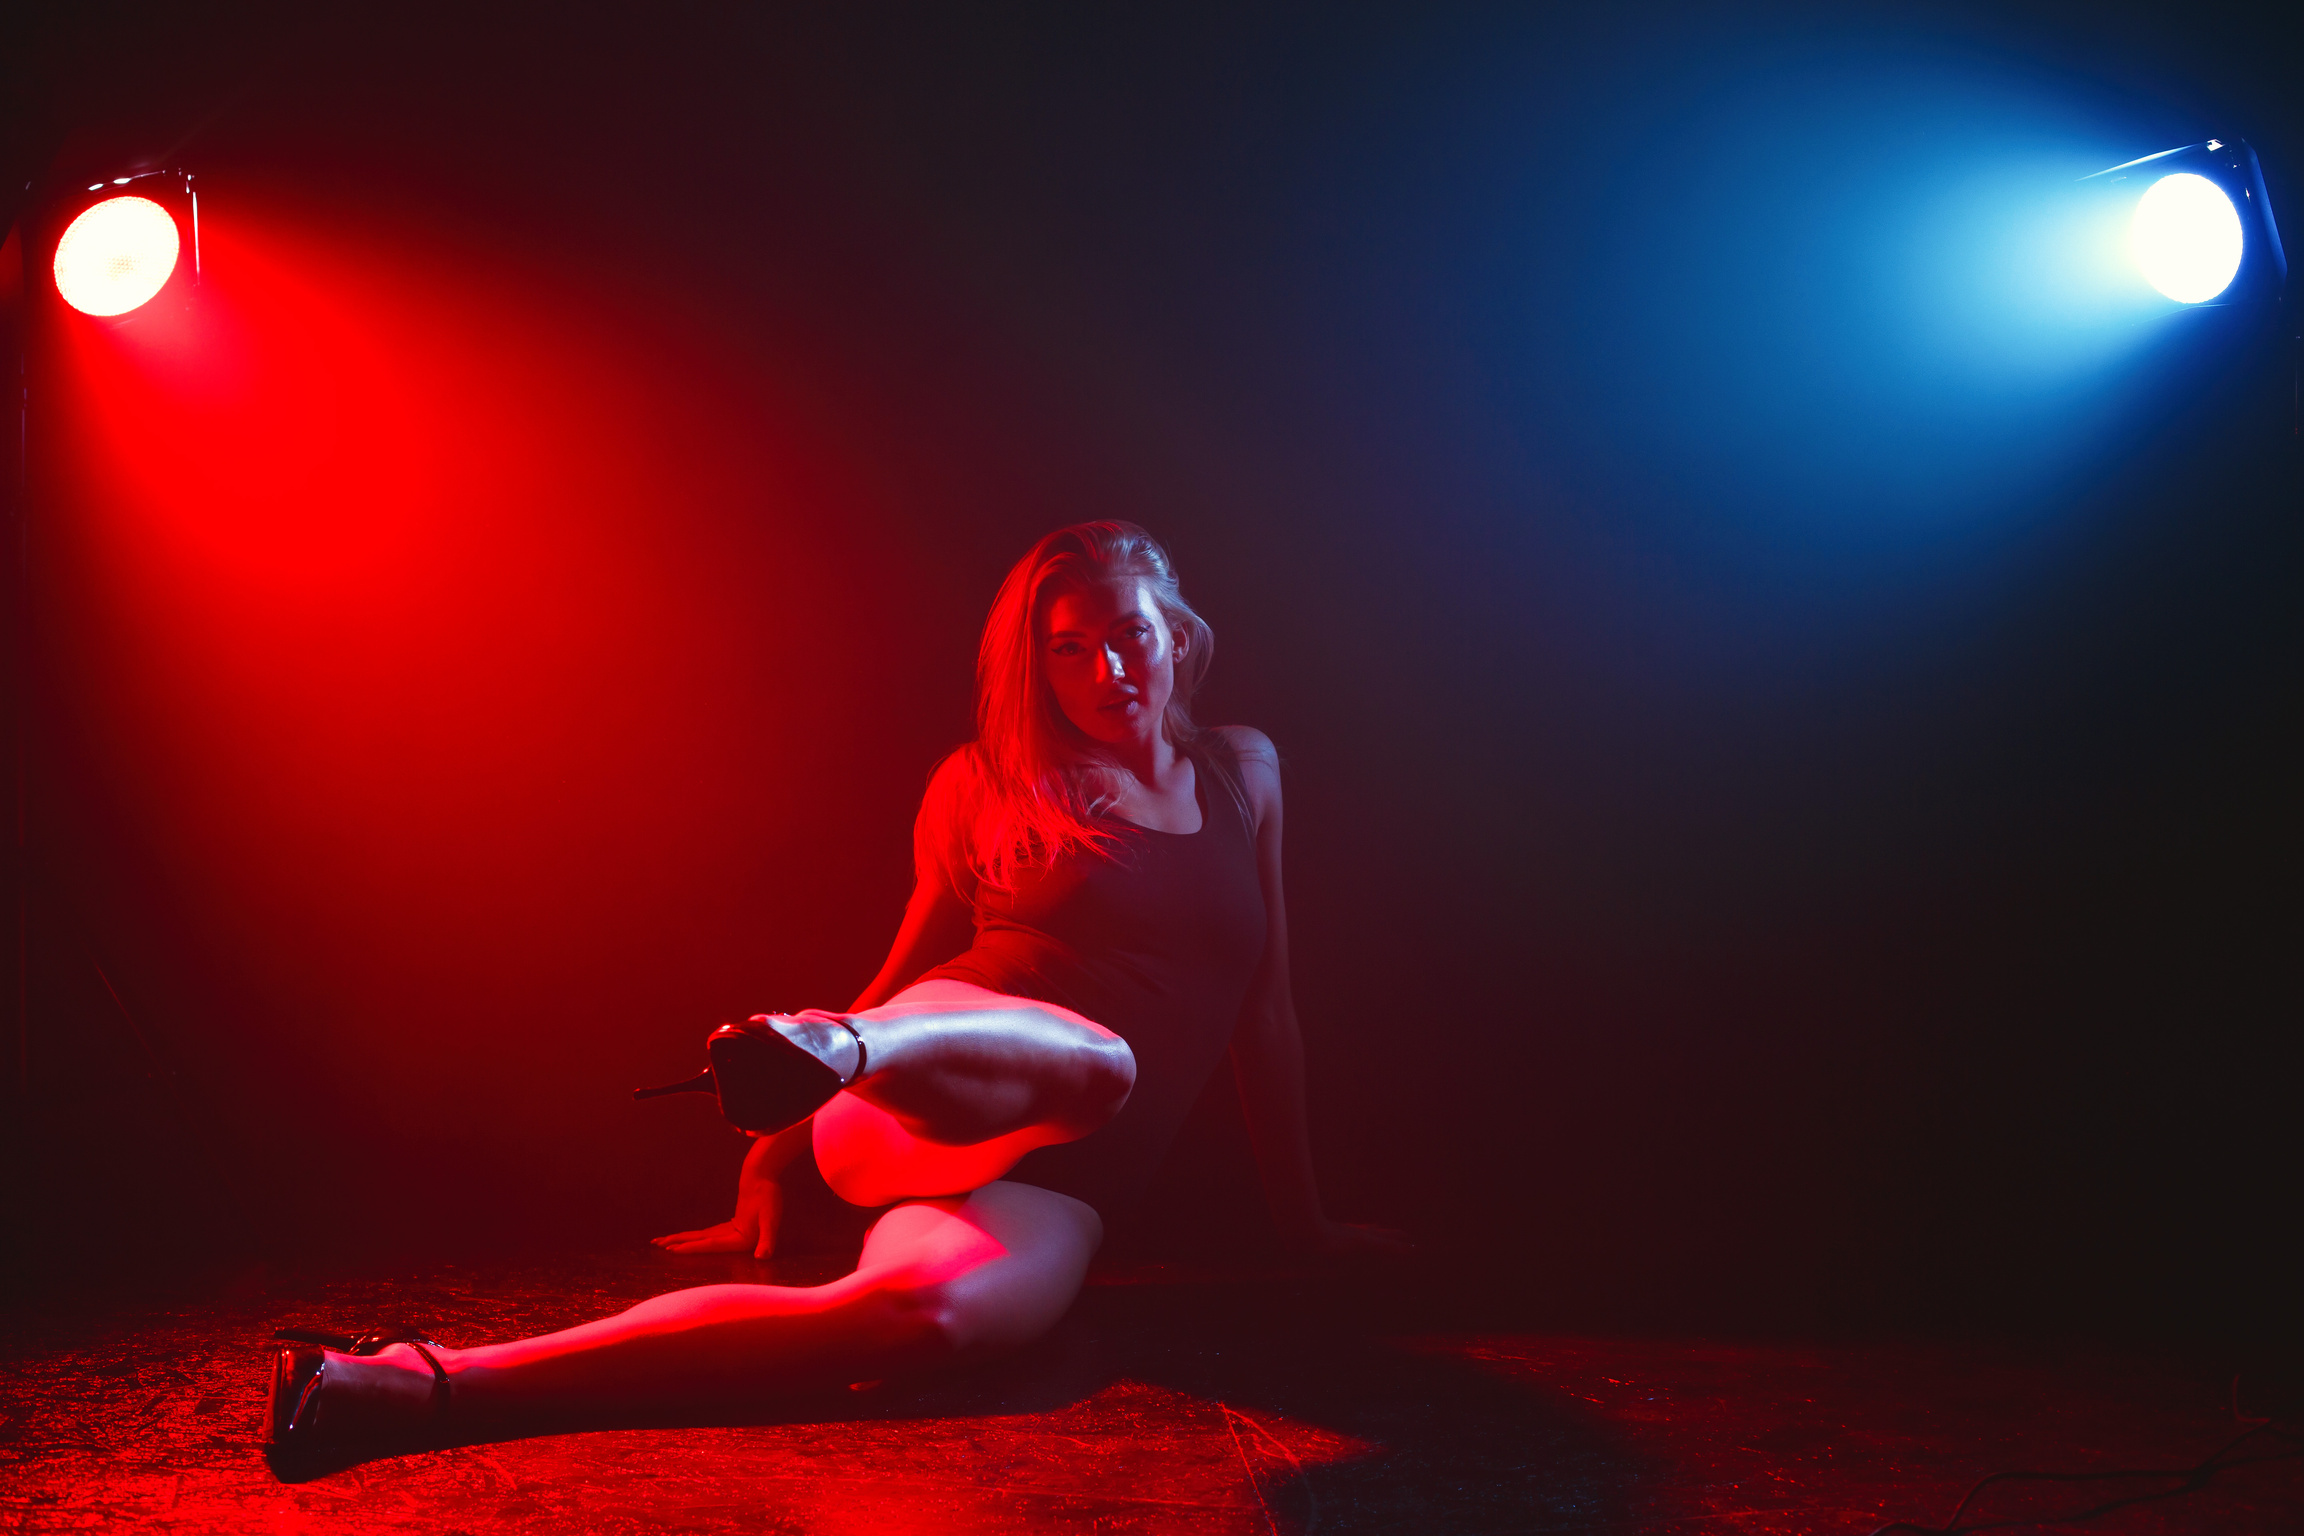 Photo of a Woman Illuminated by Red and Blue Lights